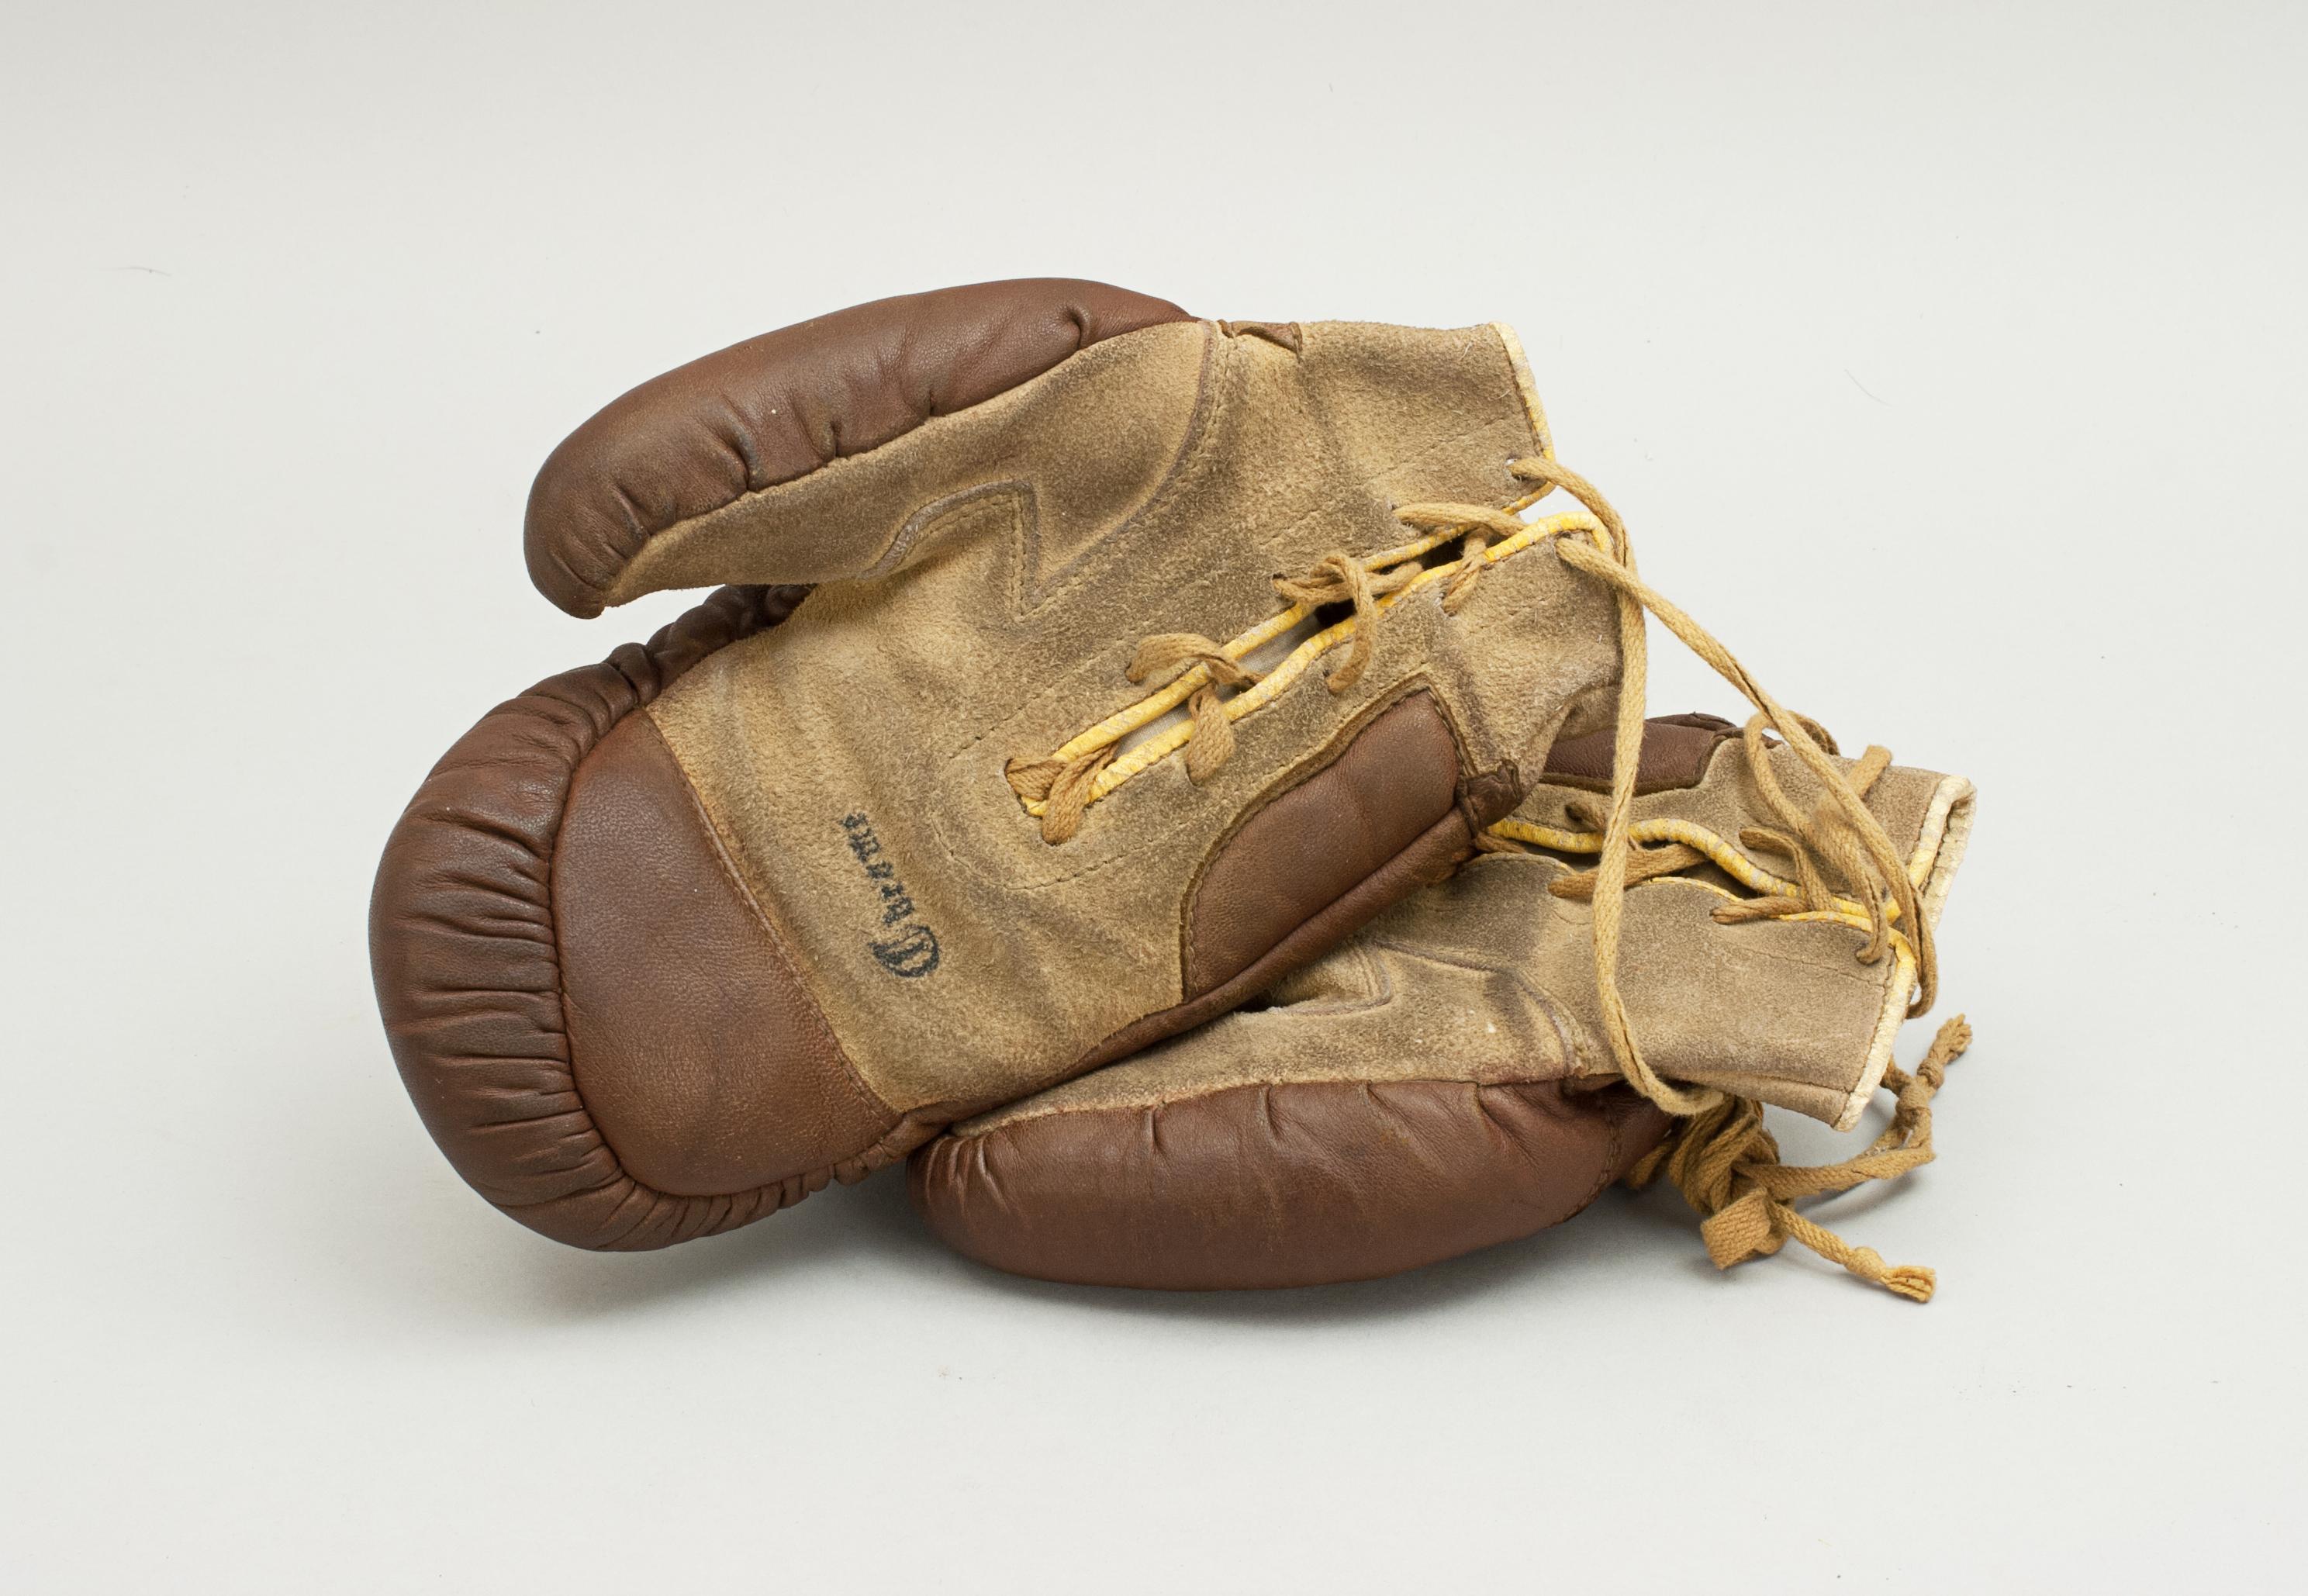 1940s boxing gloves